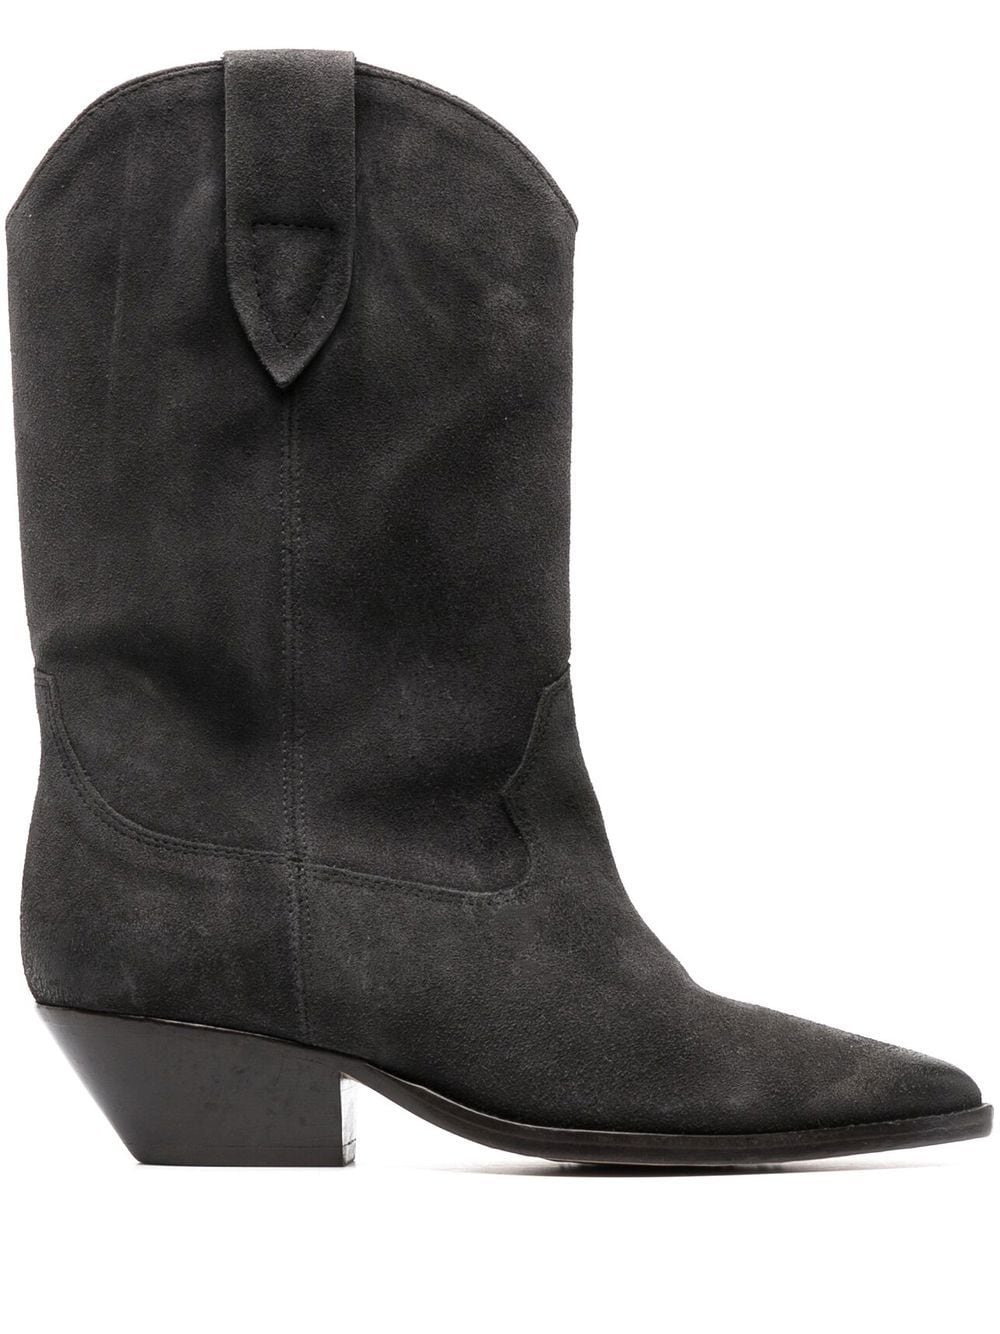 ISABEL MARANT Women's Black Leather Boots - Pointed Toe, Cuban Heel, Pull-On Style